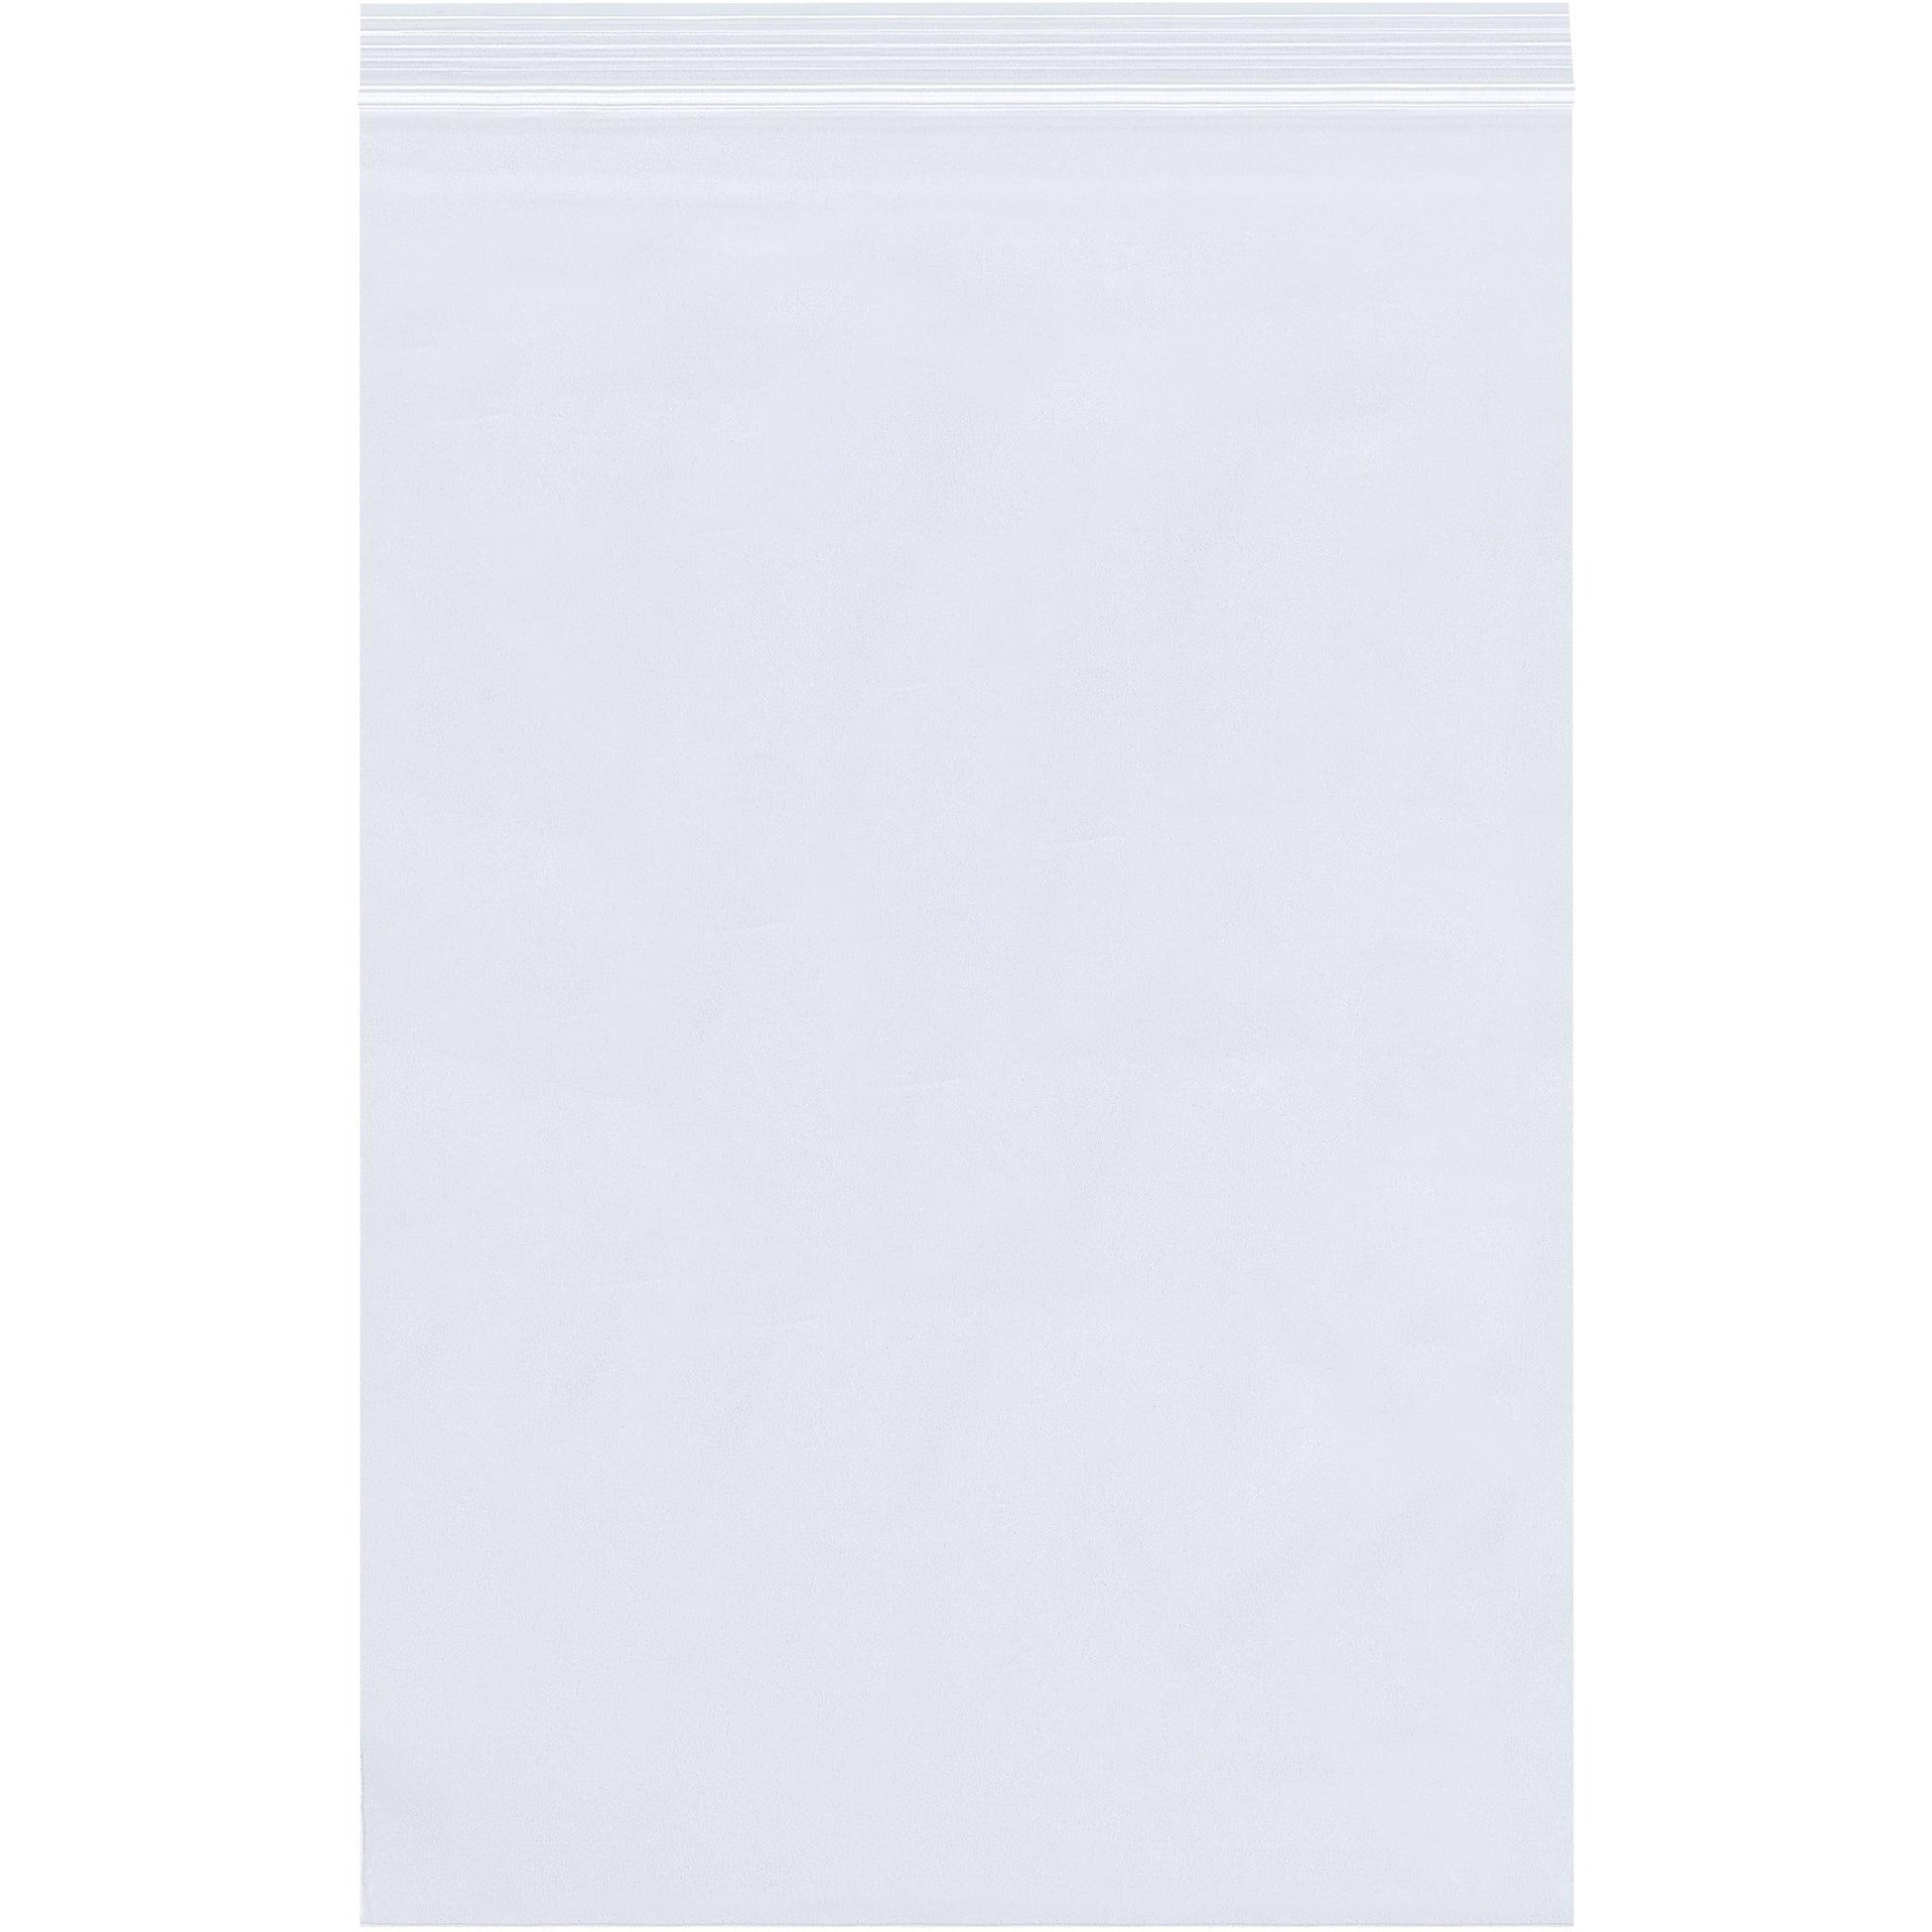 4 x 6" - 8 Mil Reclosable Poly Bags - PB3911